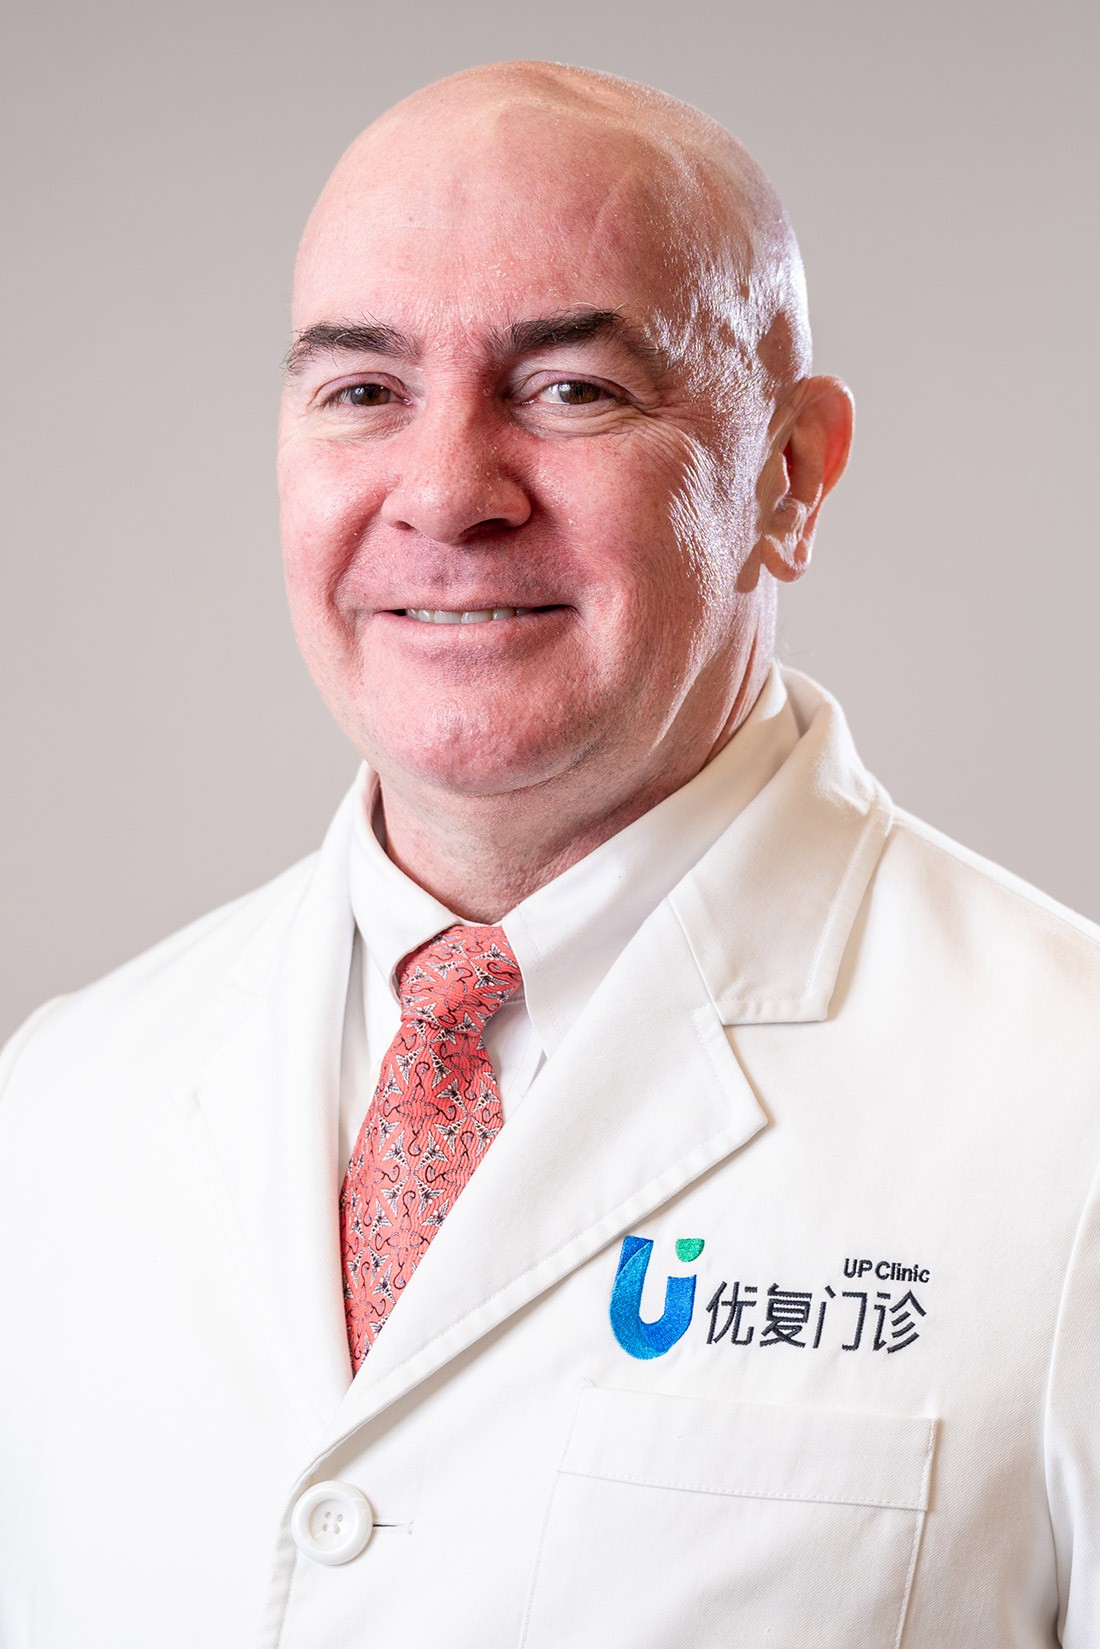 Dr Scotty - UP Clinic Shanghai